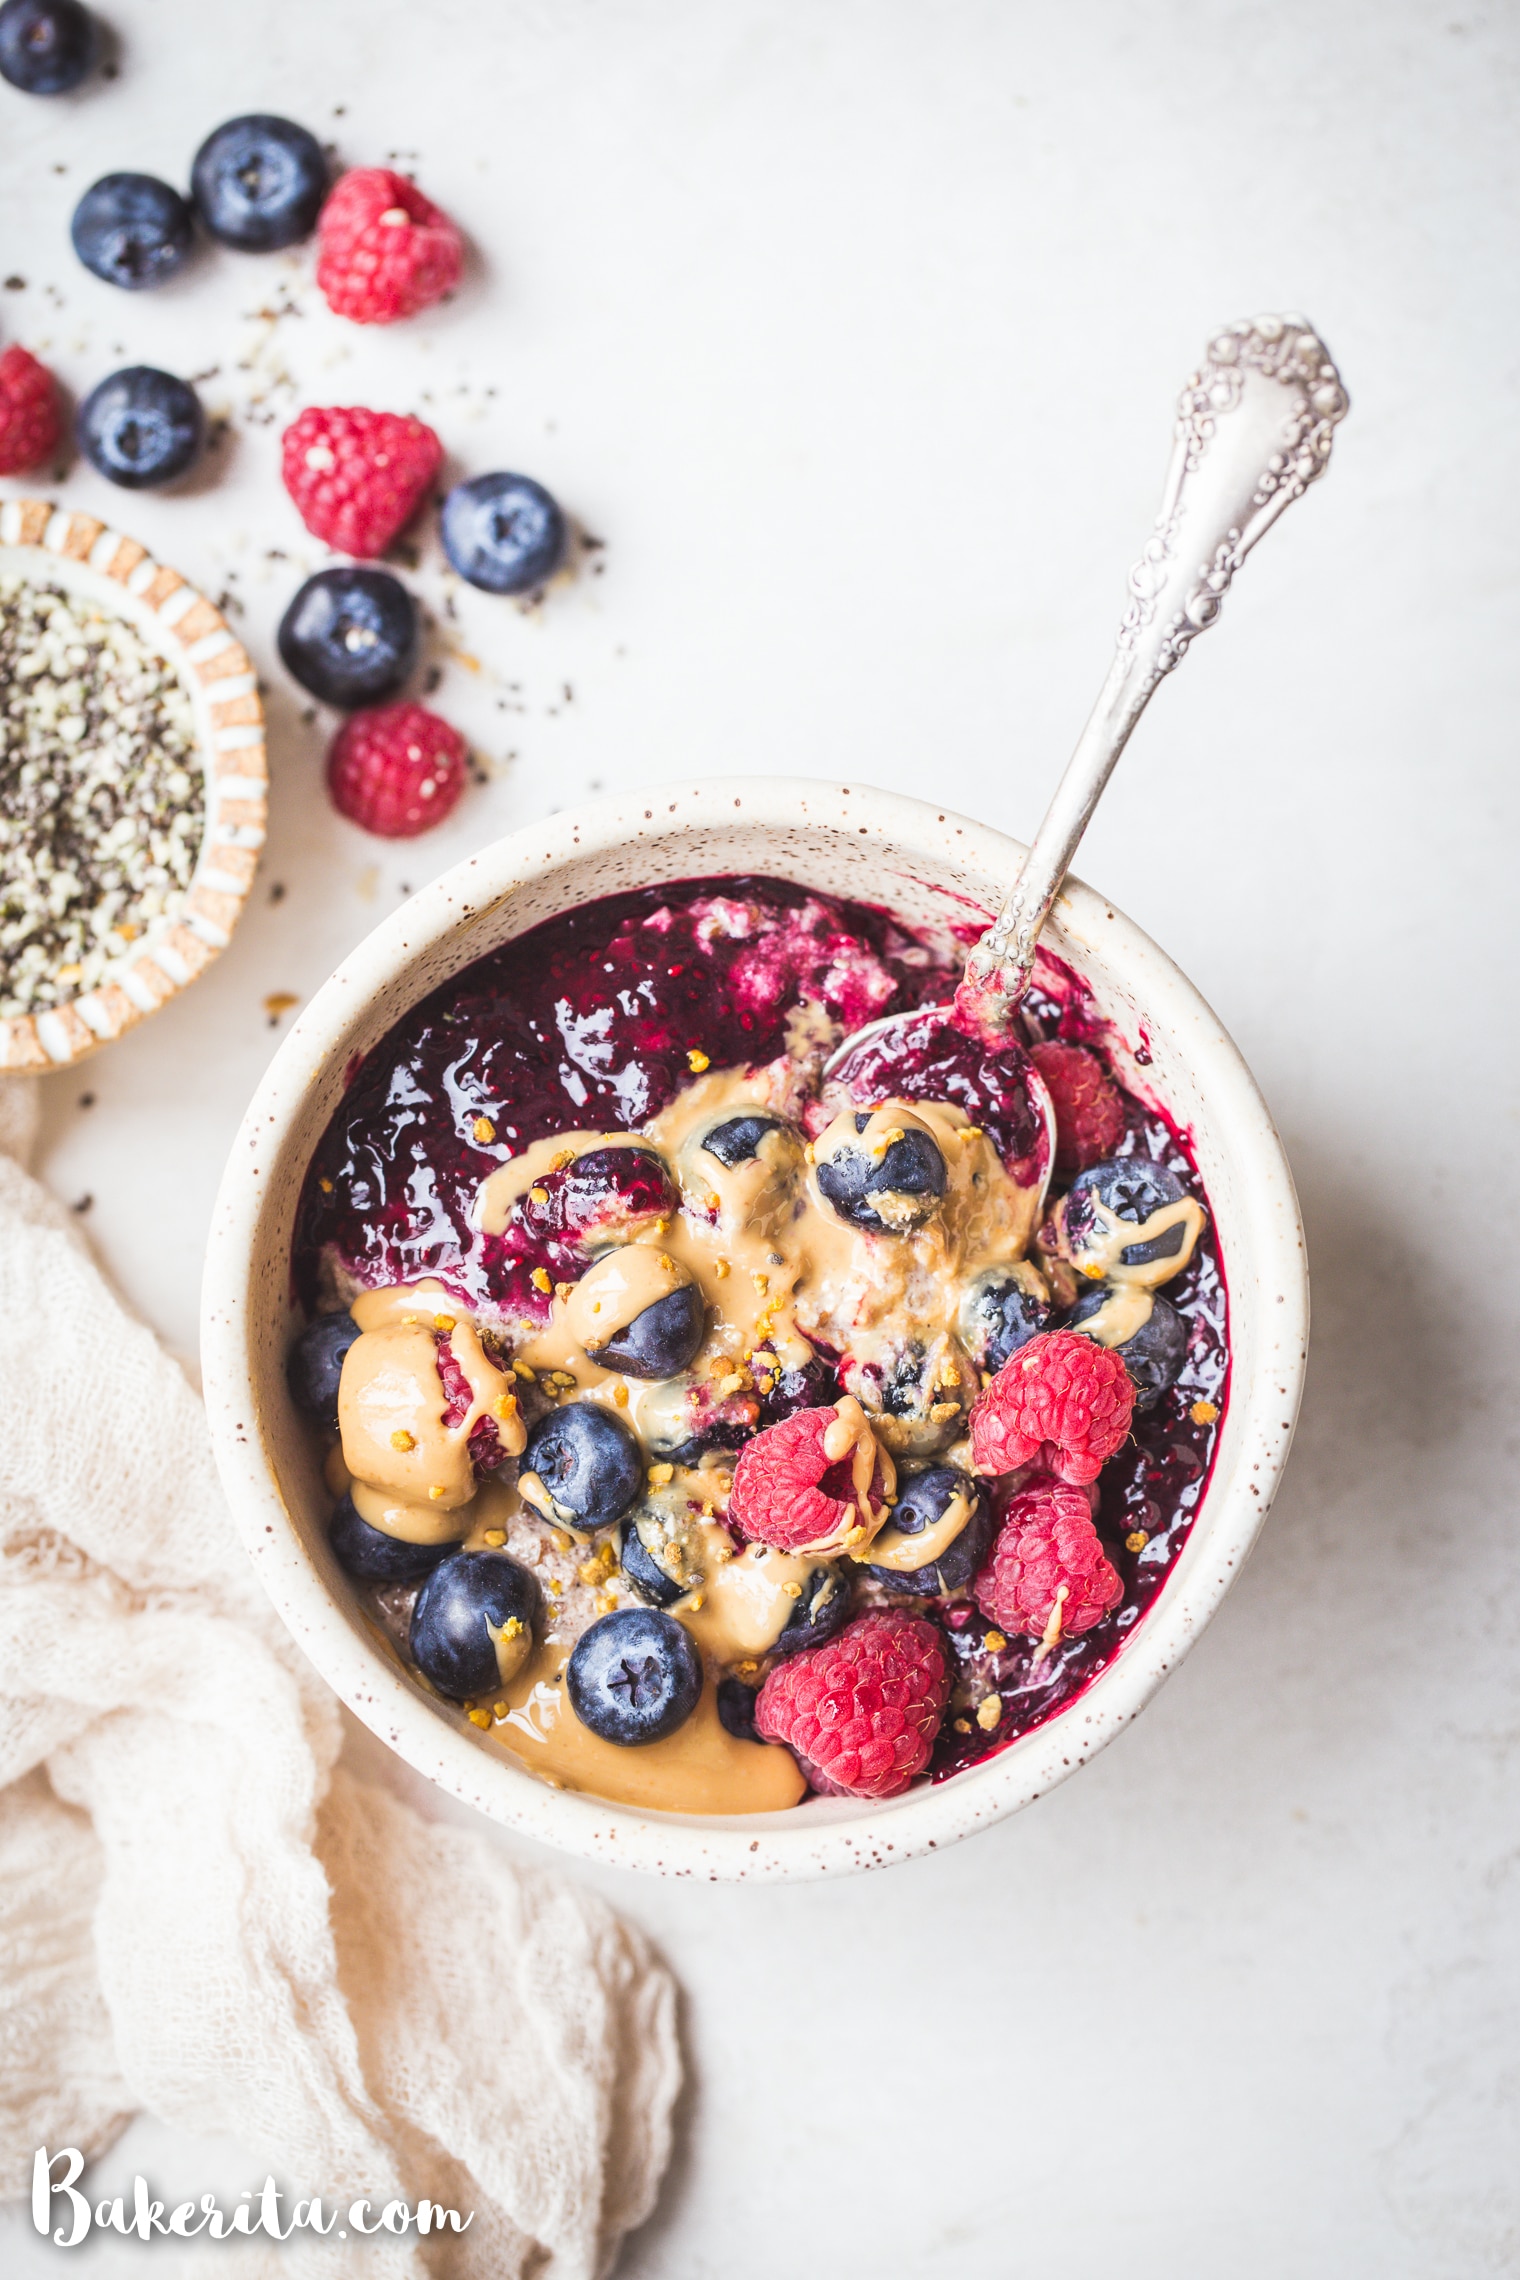 Not eating grains but missing your morning oatmeal? Look no further than this Quick Grain-Free Hot Cereal! This super easy n'oatmeal is made in just 3 minutes and it's gluten-free, paleo, vegan, and Whole30-friendly. This is a staple Whole30 breakfast!